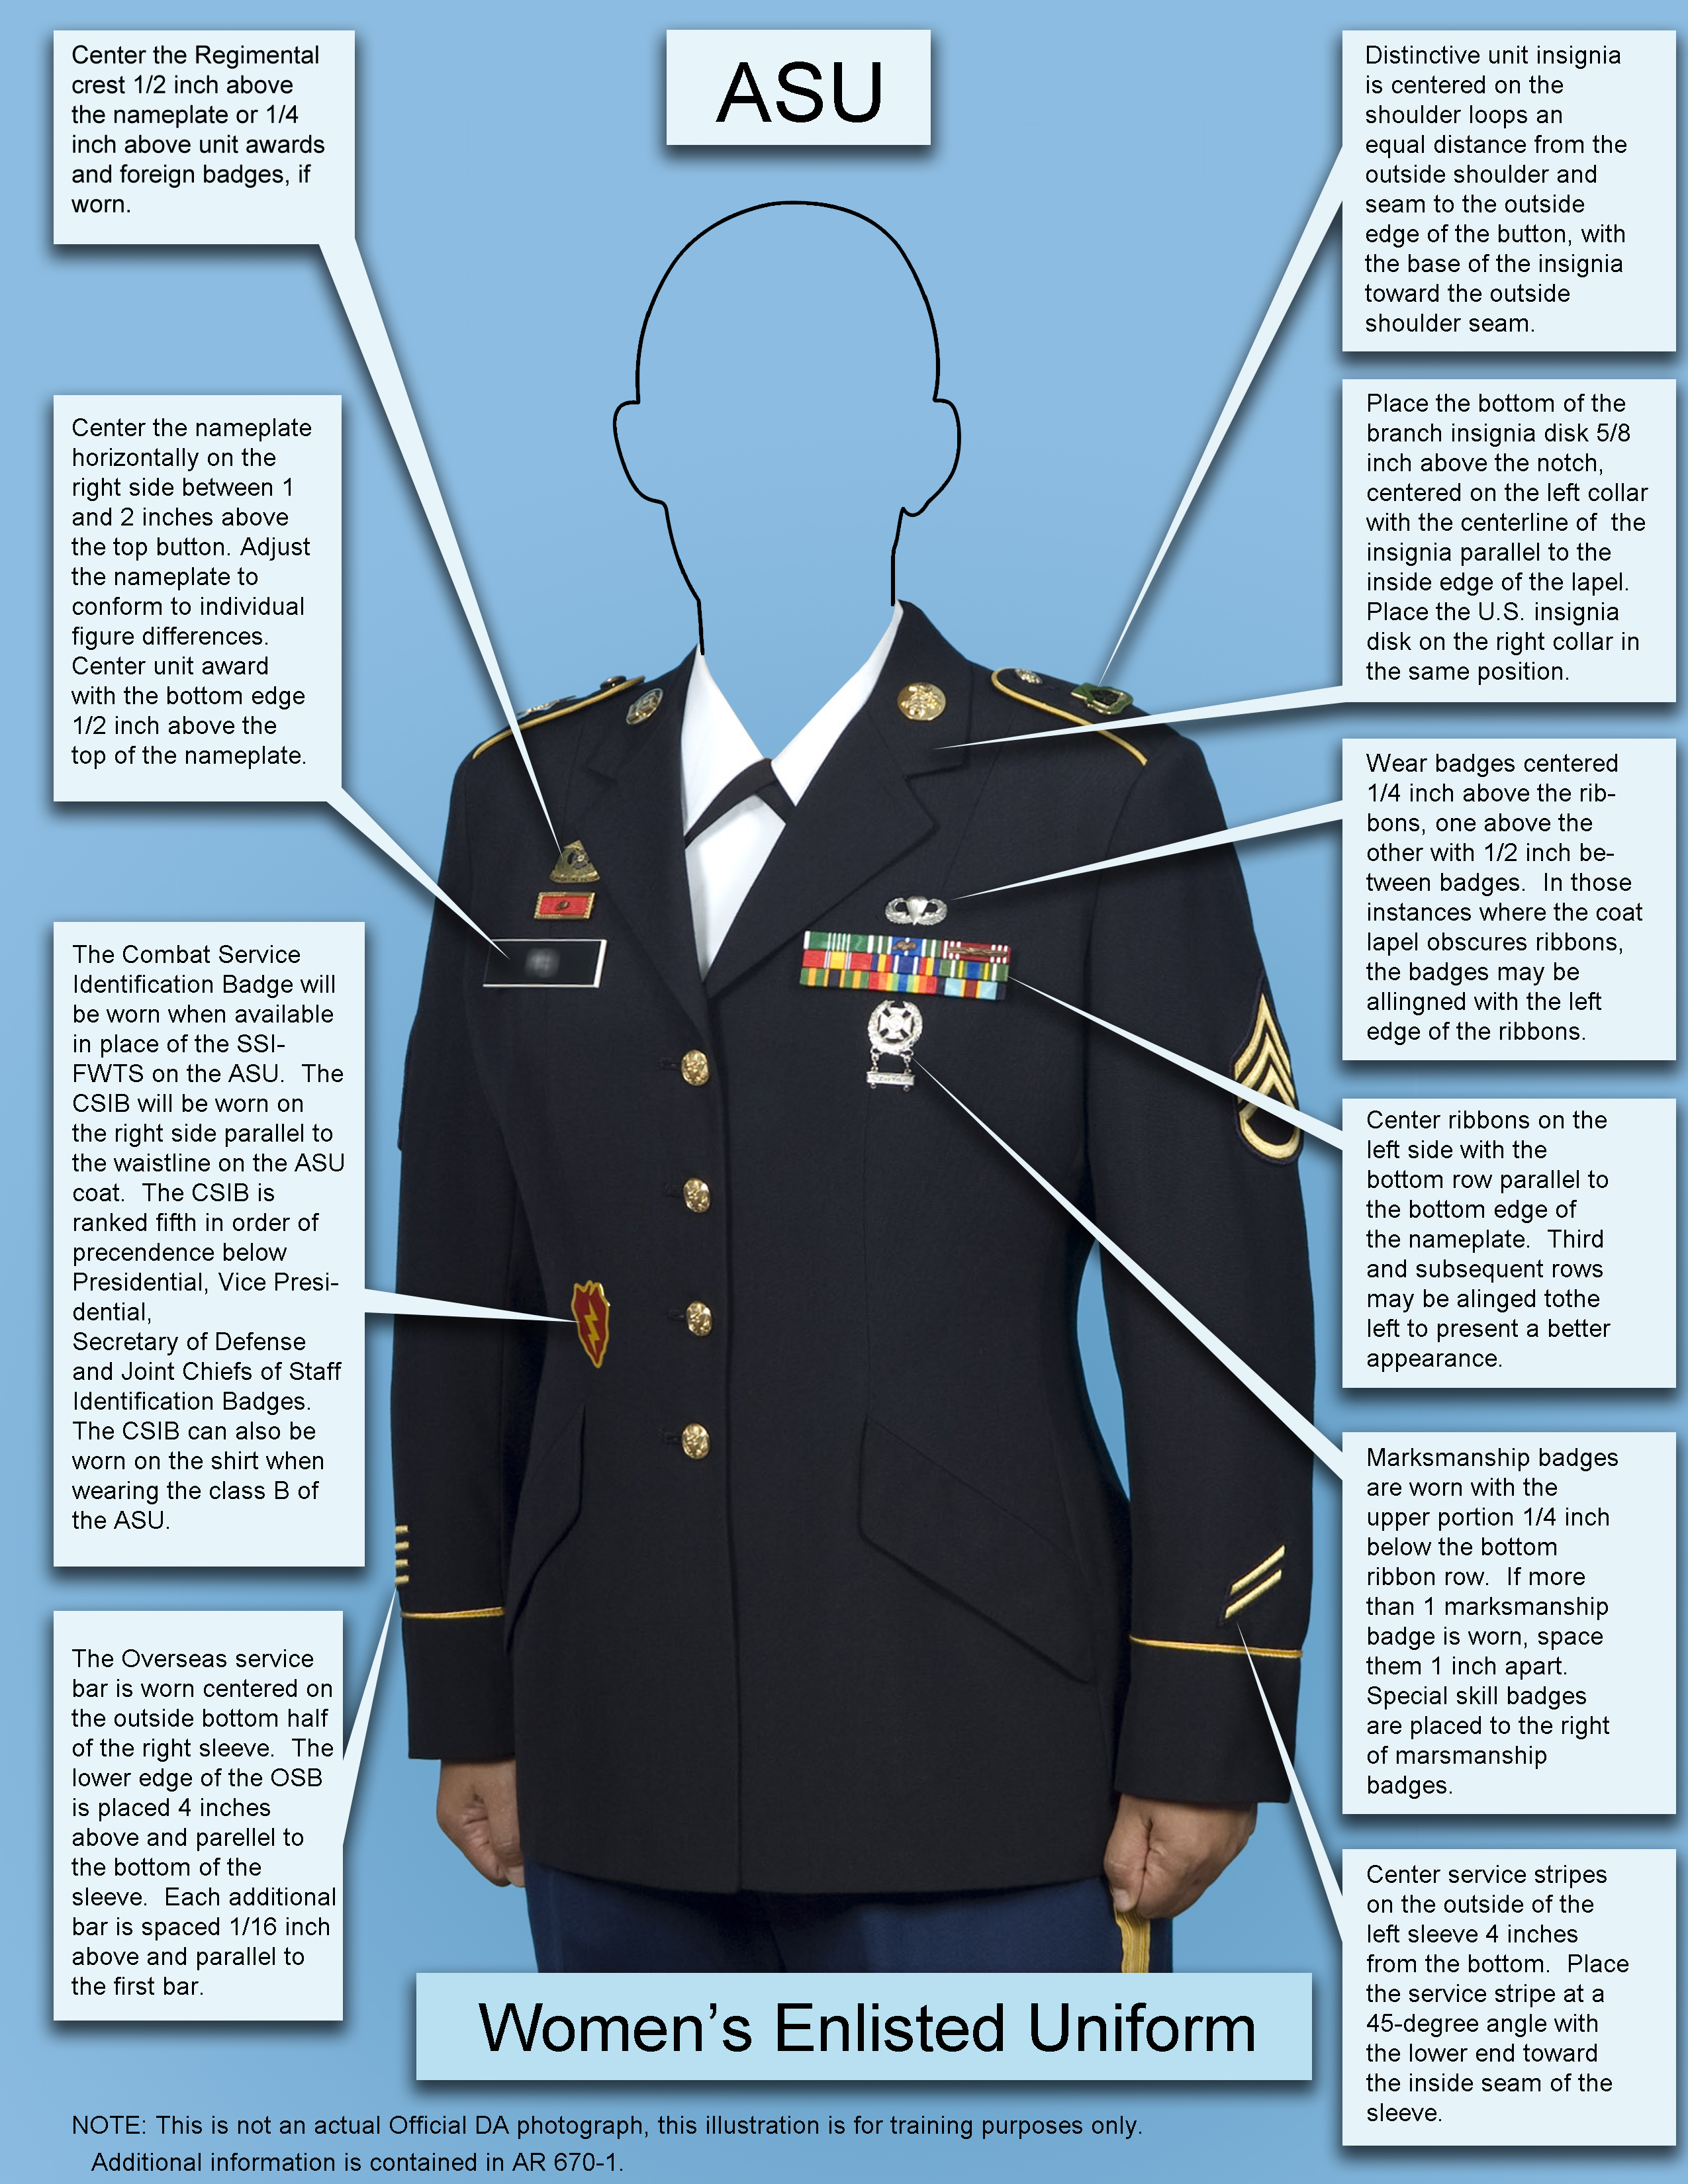 Military Uniform and Appearance